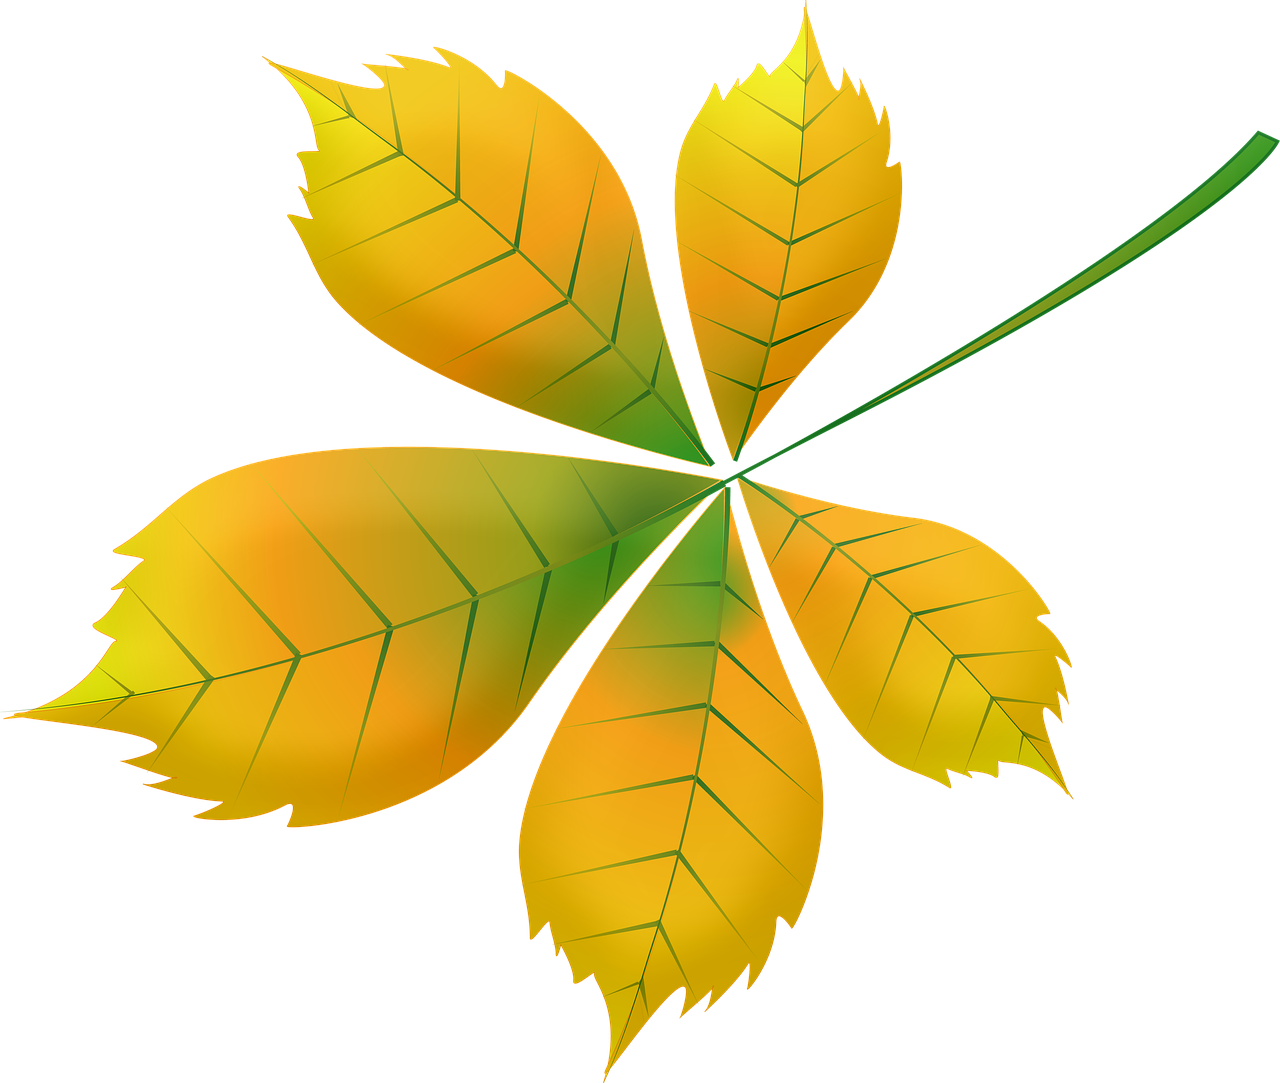 a close up of a leaf on a black background, a digital rendering, full color illustration, beginning of autumn, yellow and green scheme, vectorized